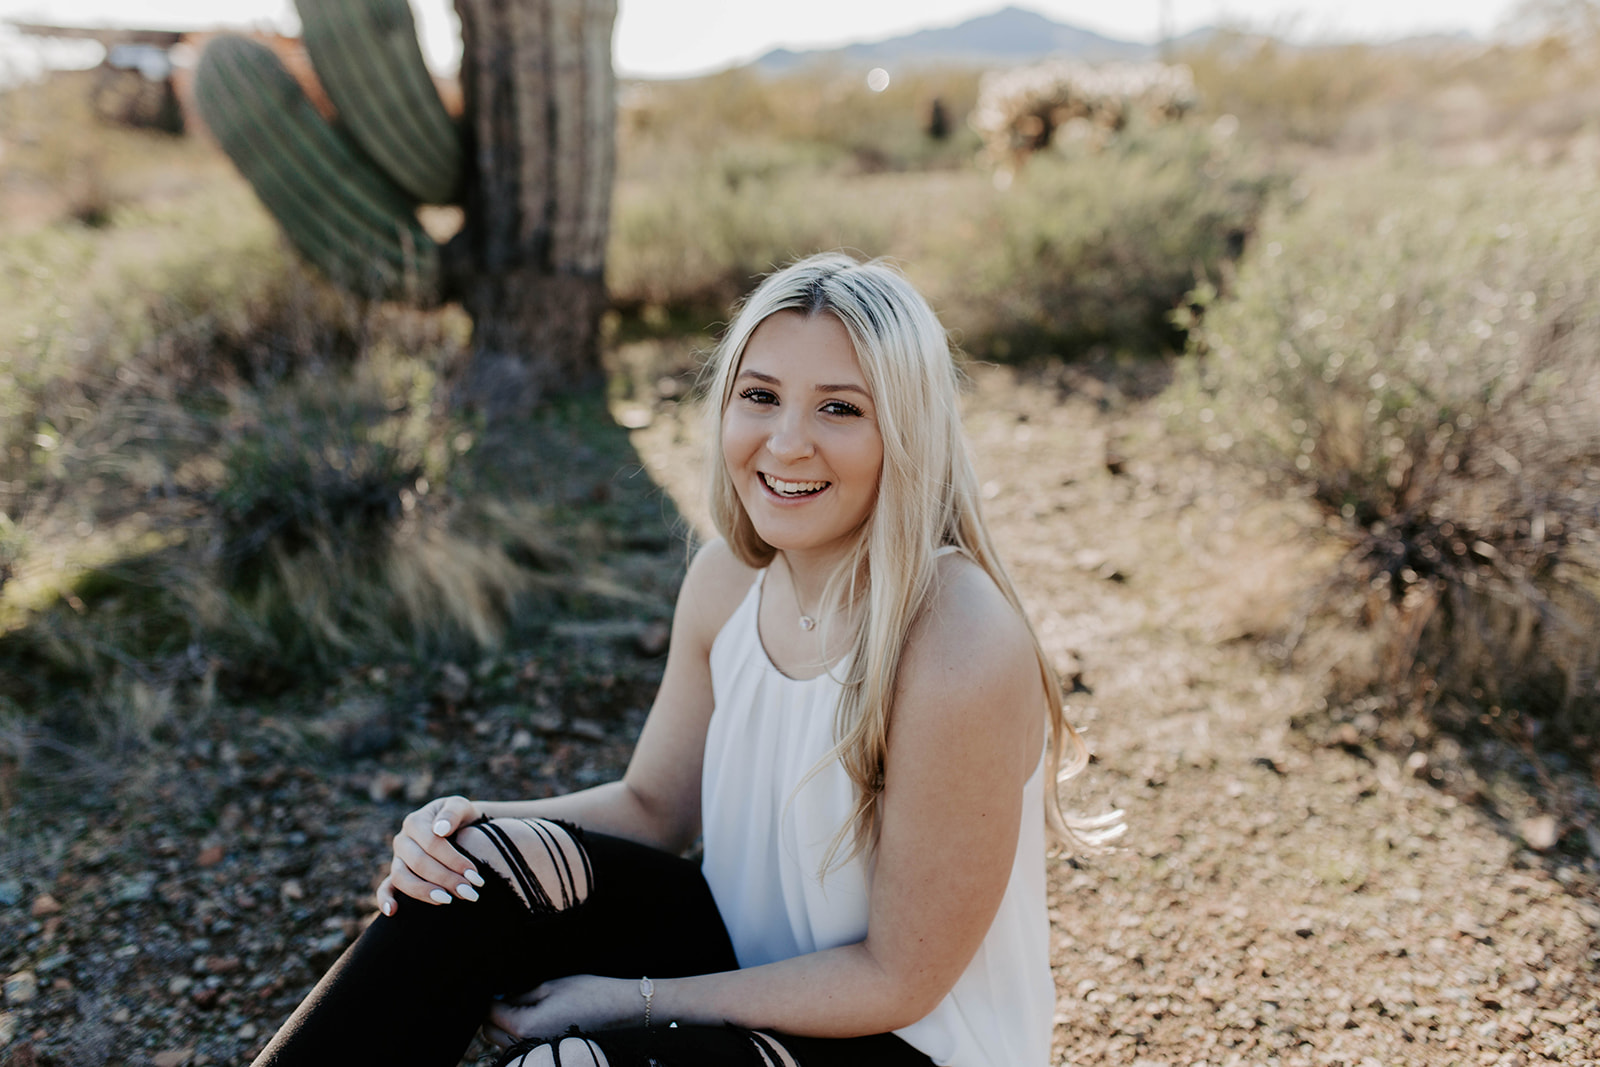 Sunny Desert Spring Senior Session by Isabella Lusk, Arizona Photographer. This blog post includes posing and outfit ideas for senior sessions.